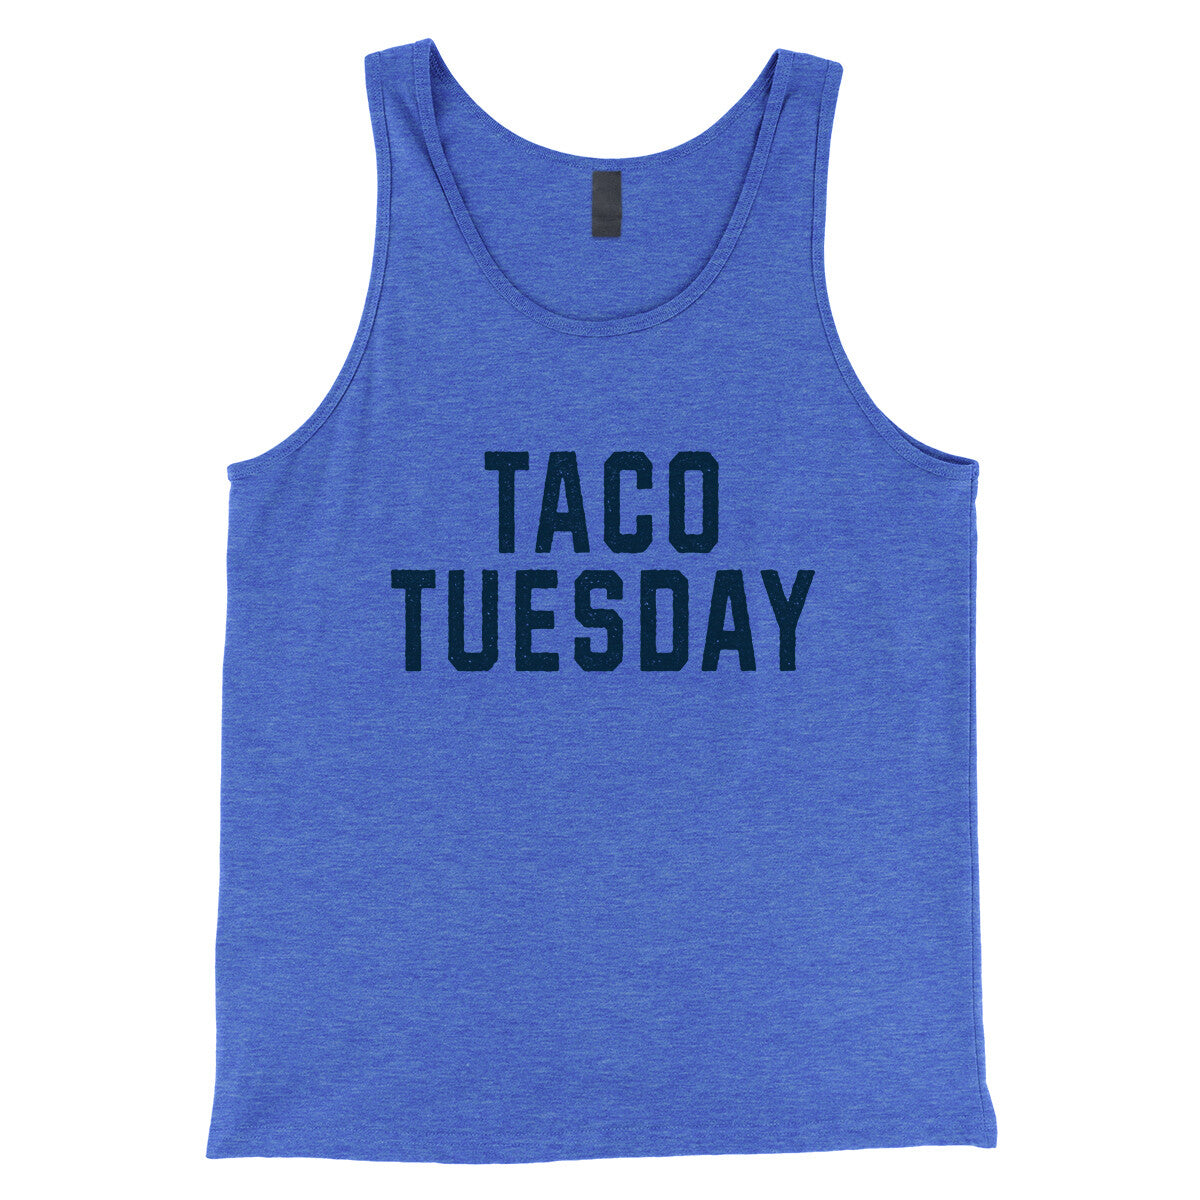 Taco Tuesday in True Royal TriBlend Color